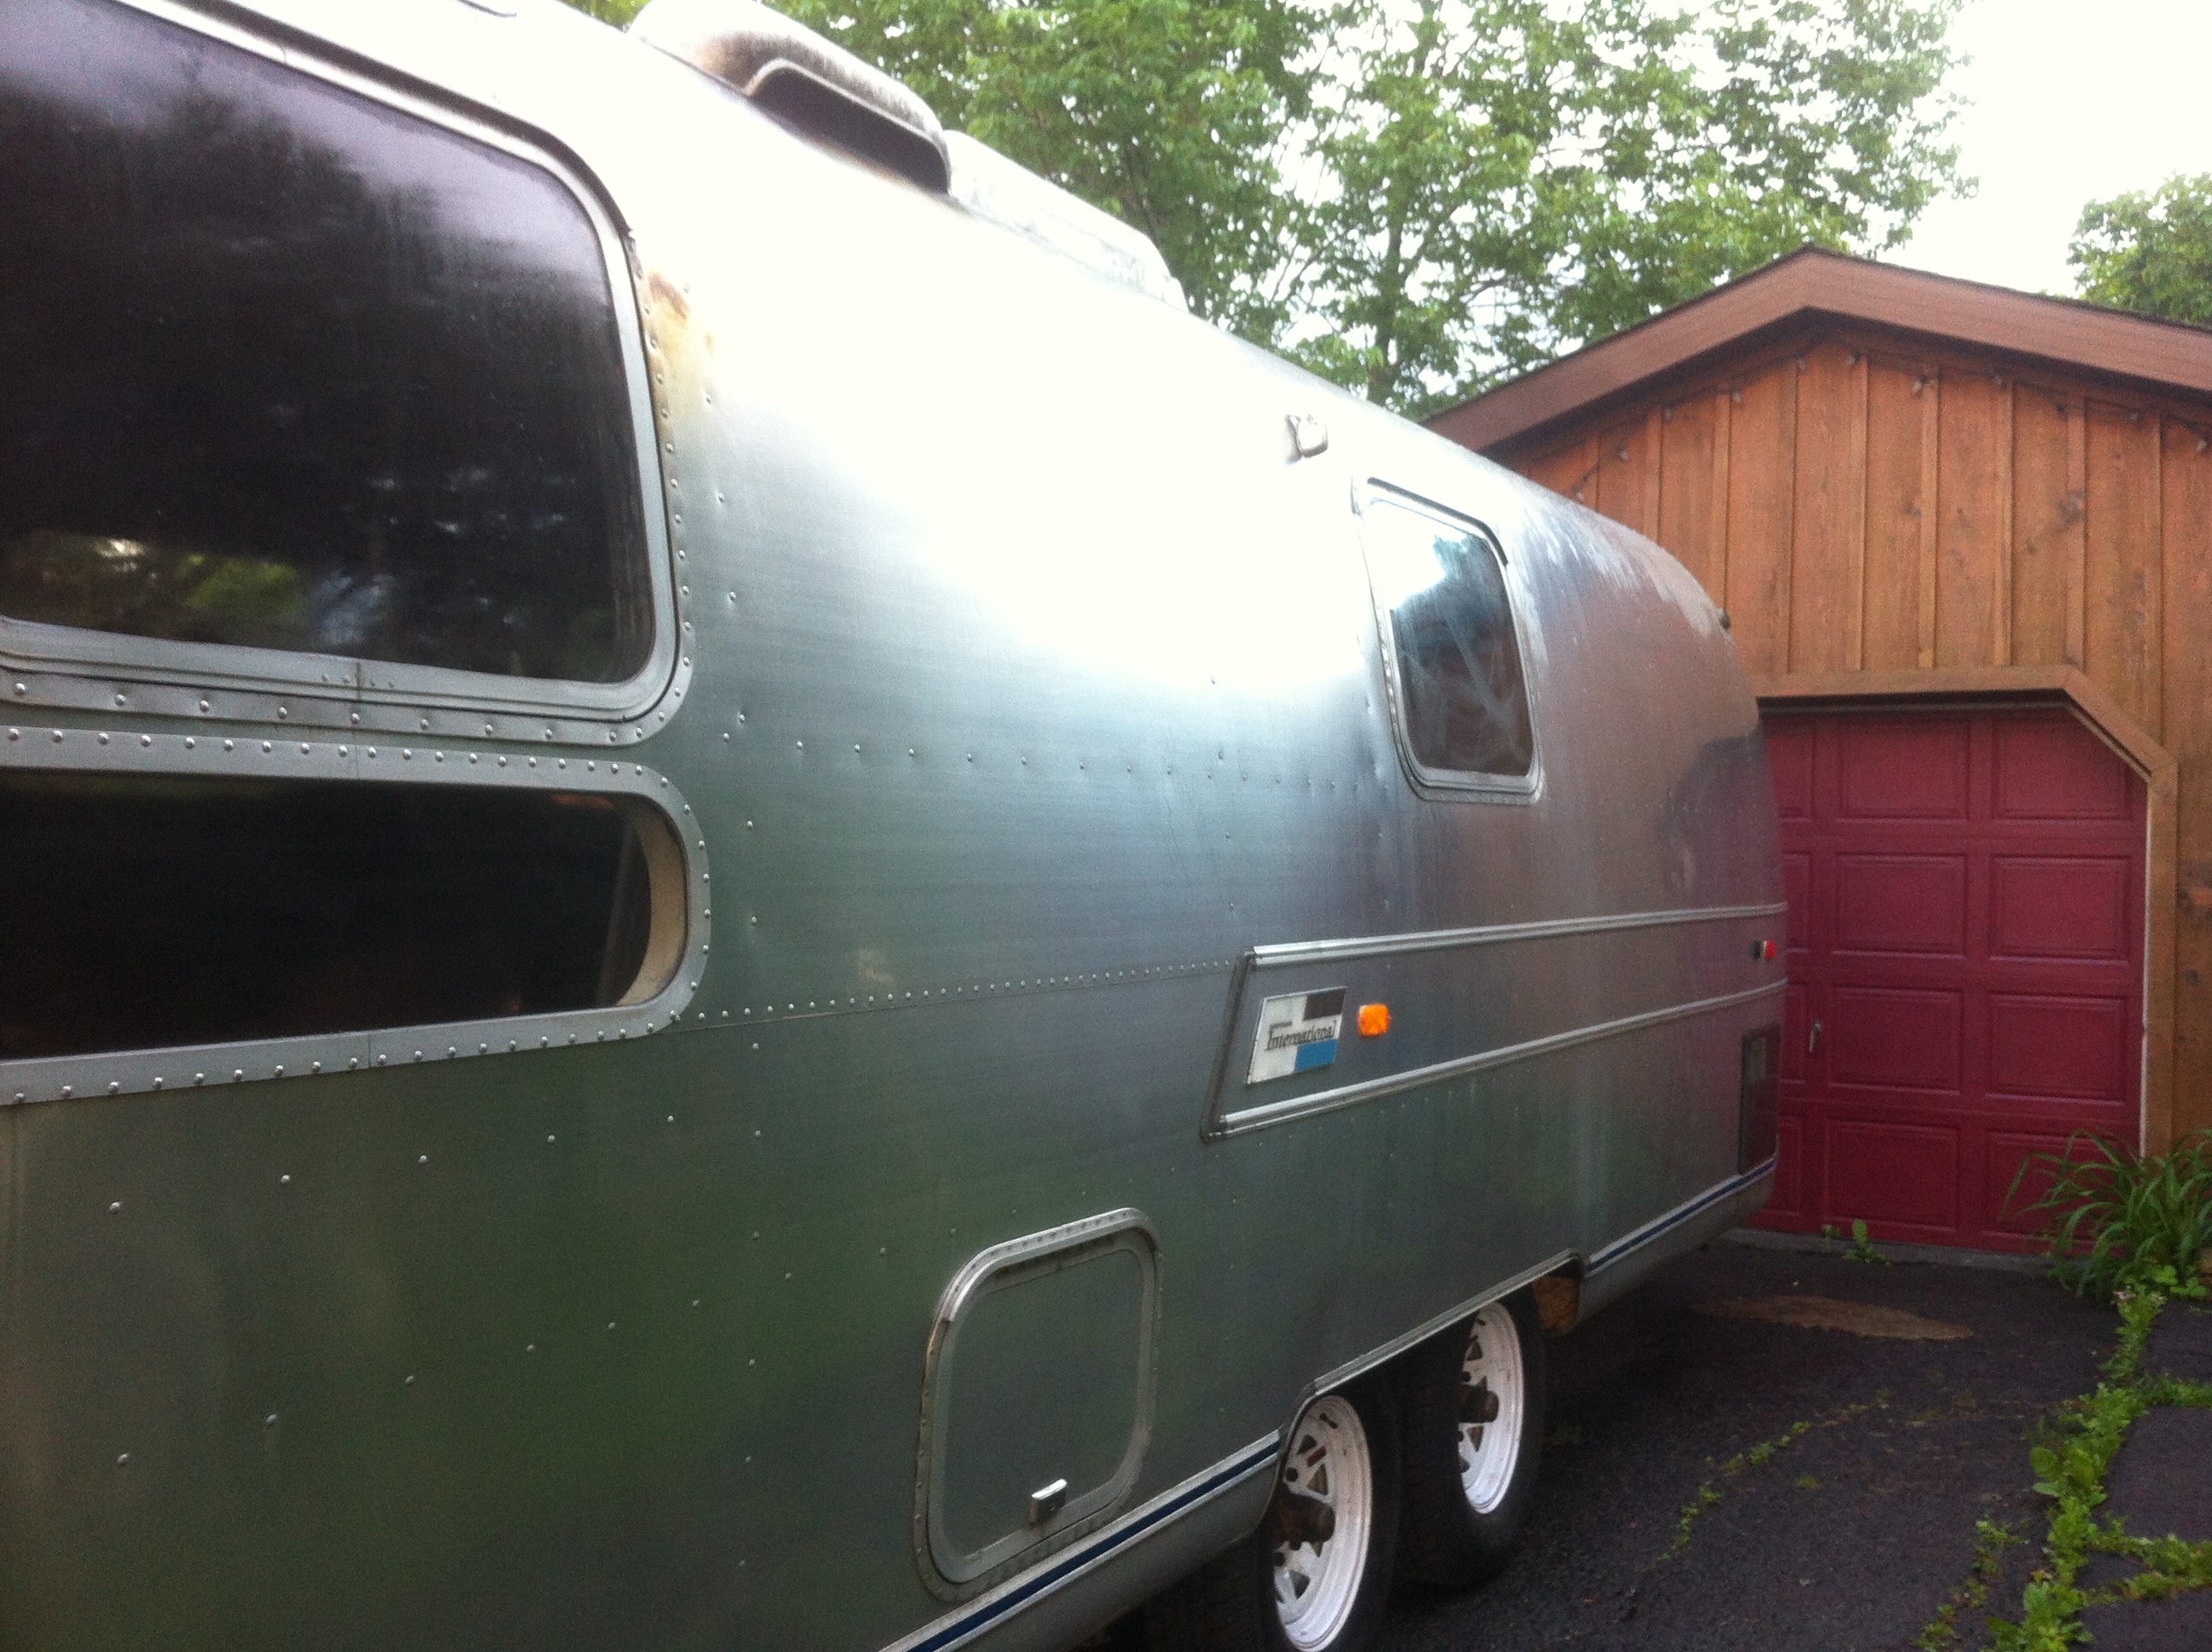 Gutting The Interior Airstream Trailer Complete Renovation